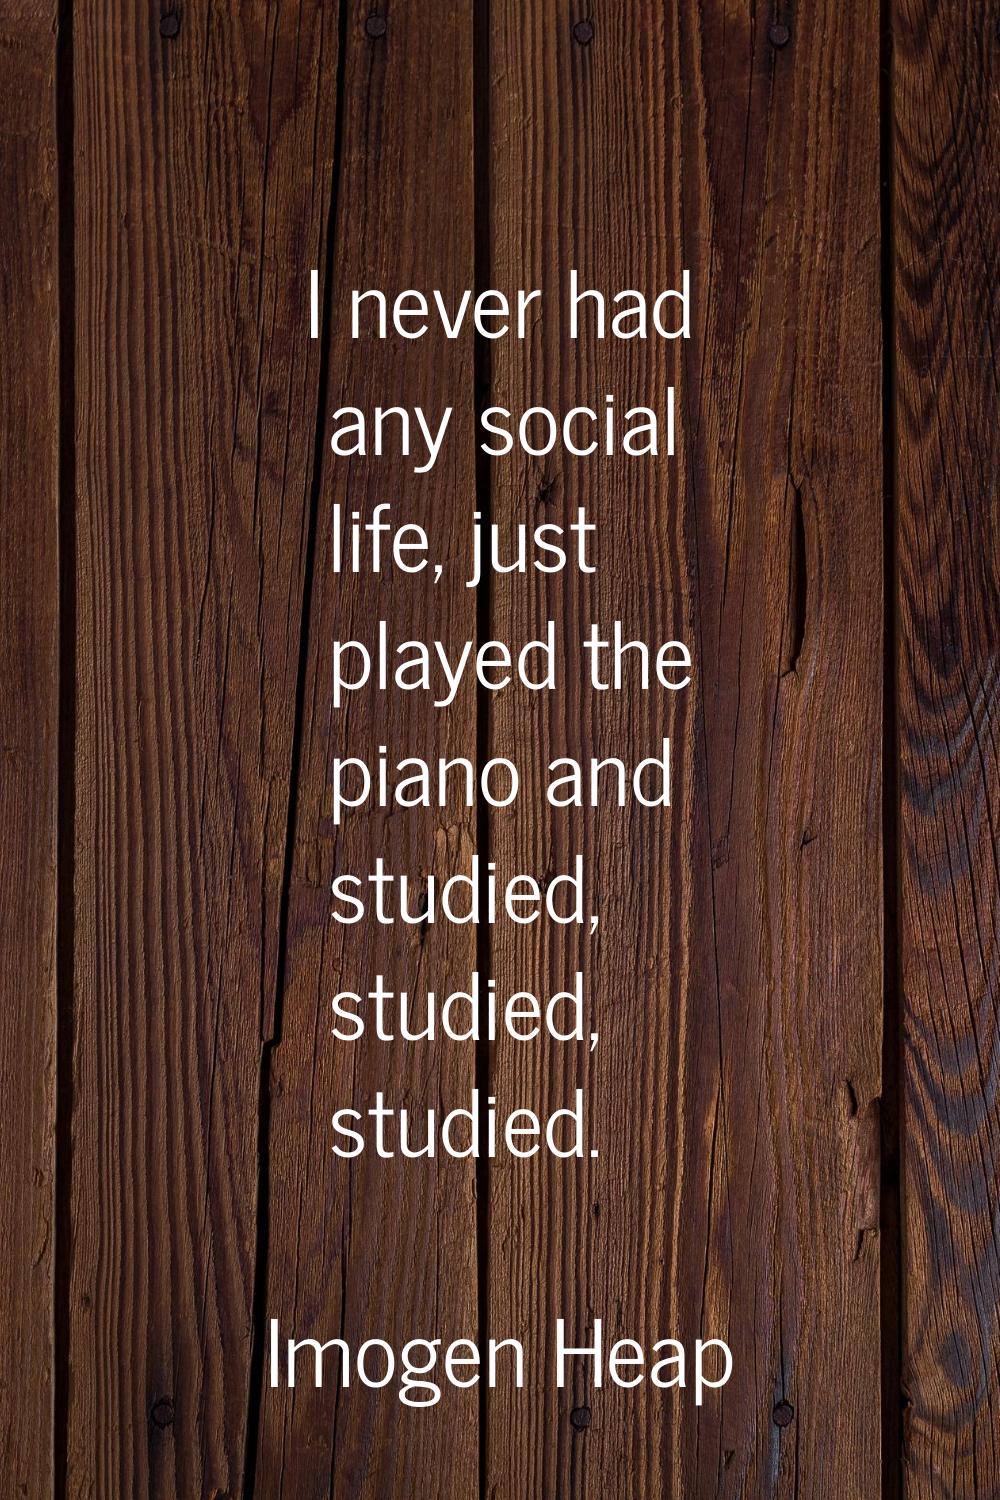 I never had any social life, just played the piano and studied, studied, studied.